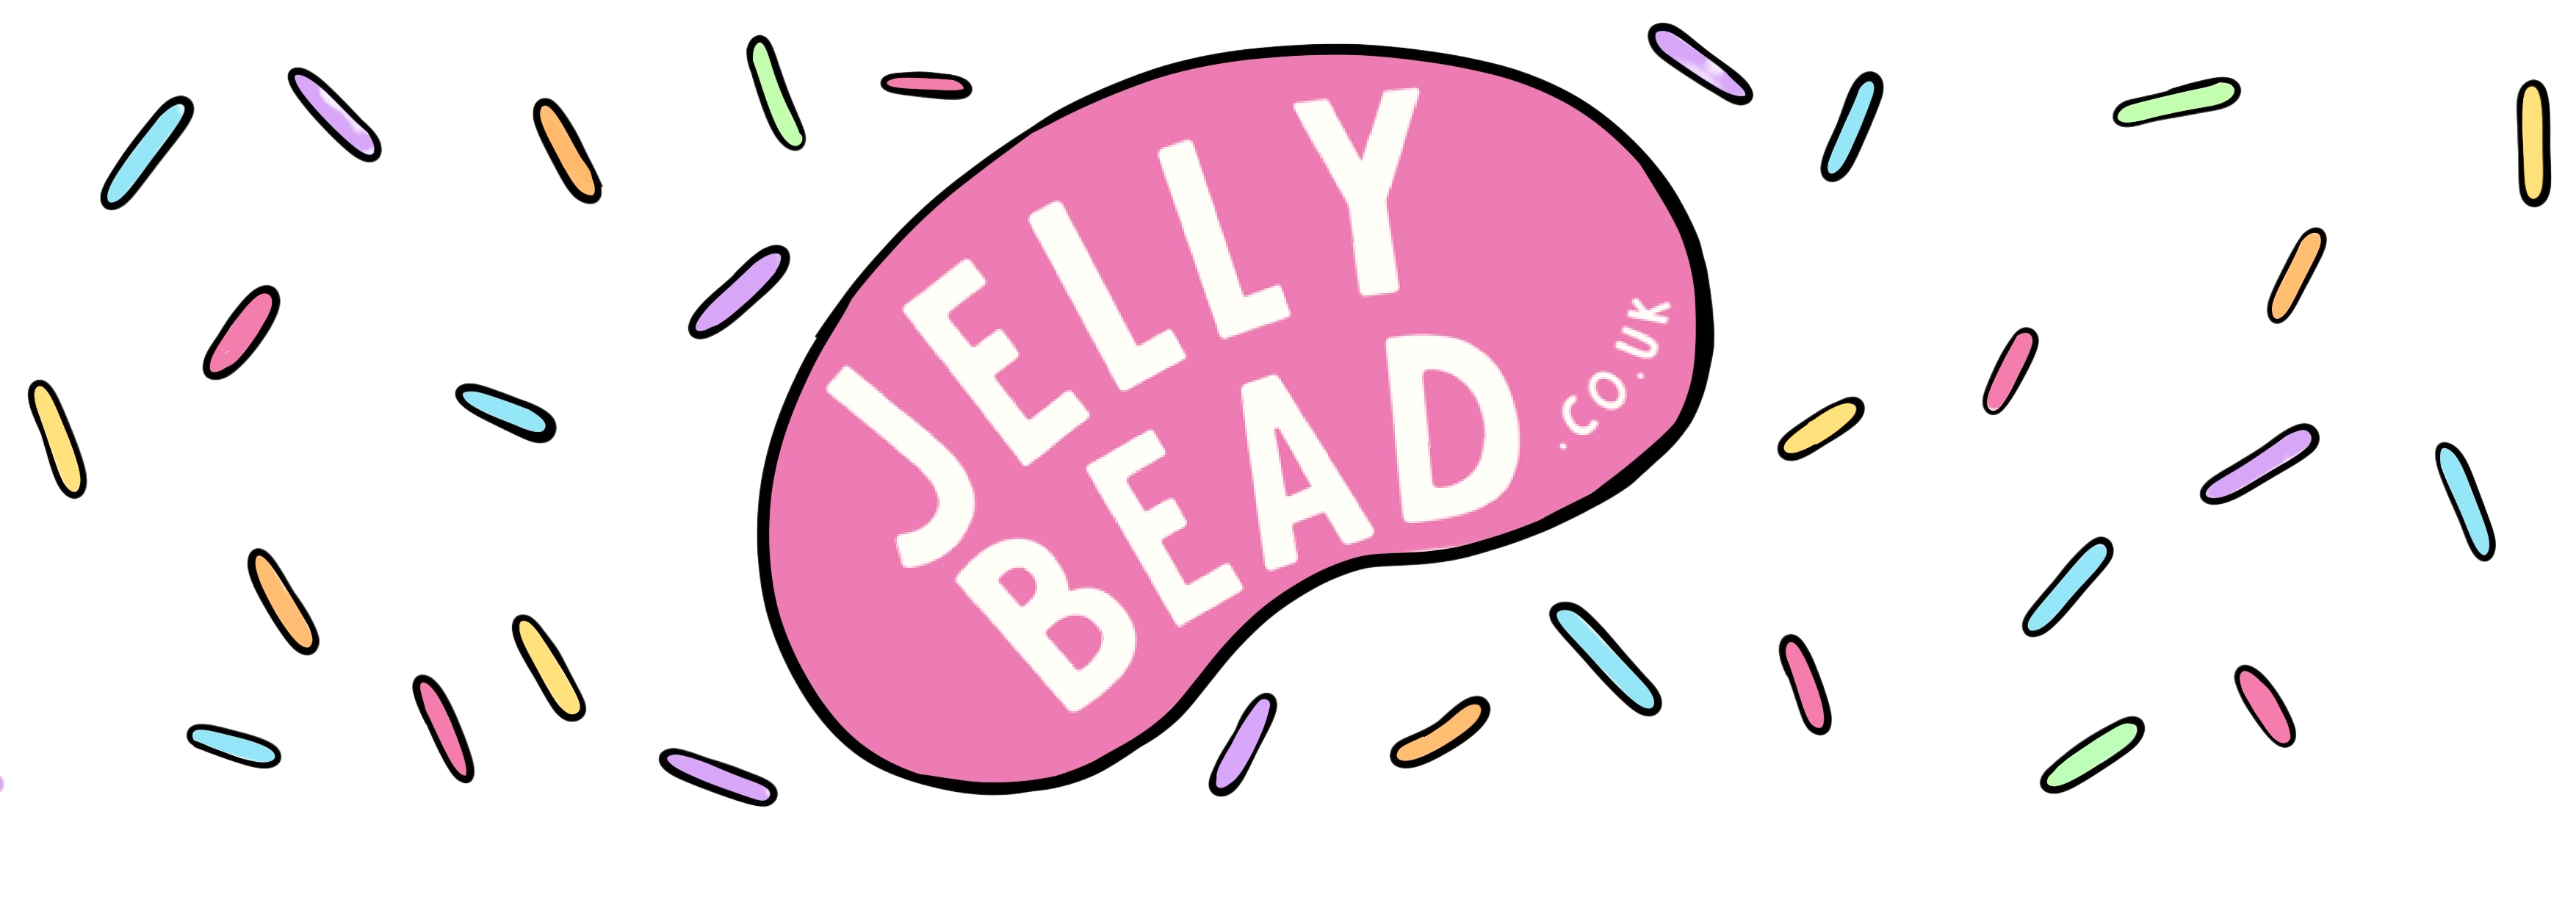 Jelly bead childrens Slime Posca and Craft experience parties and workshops